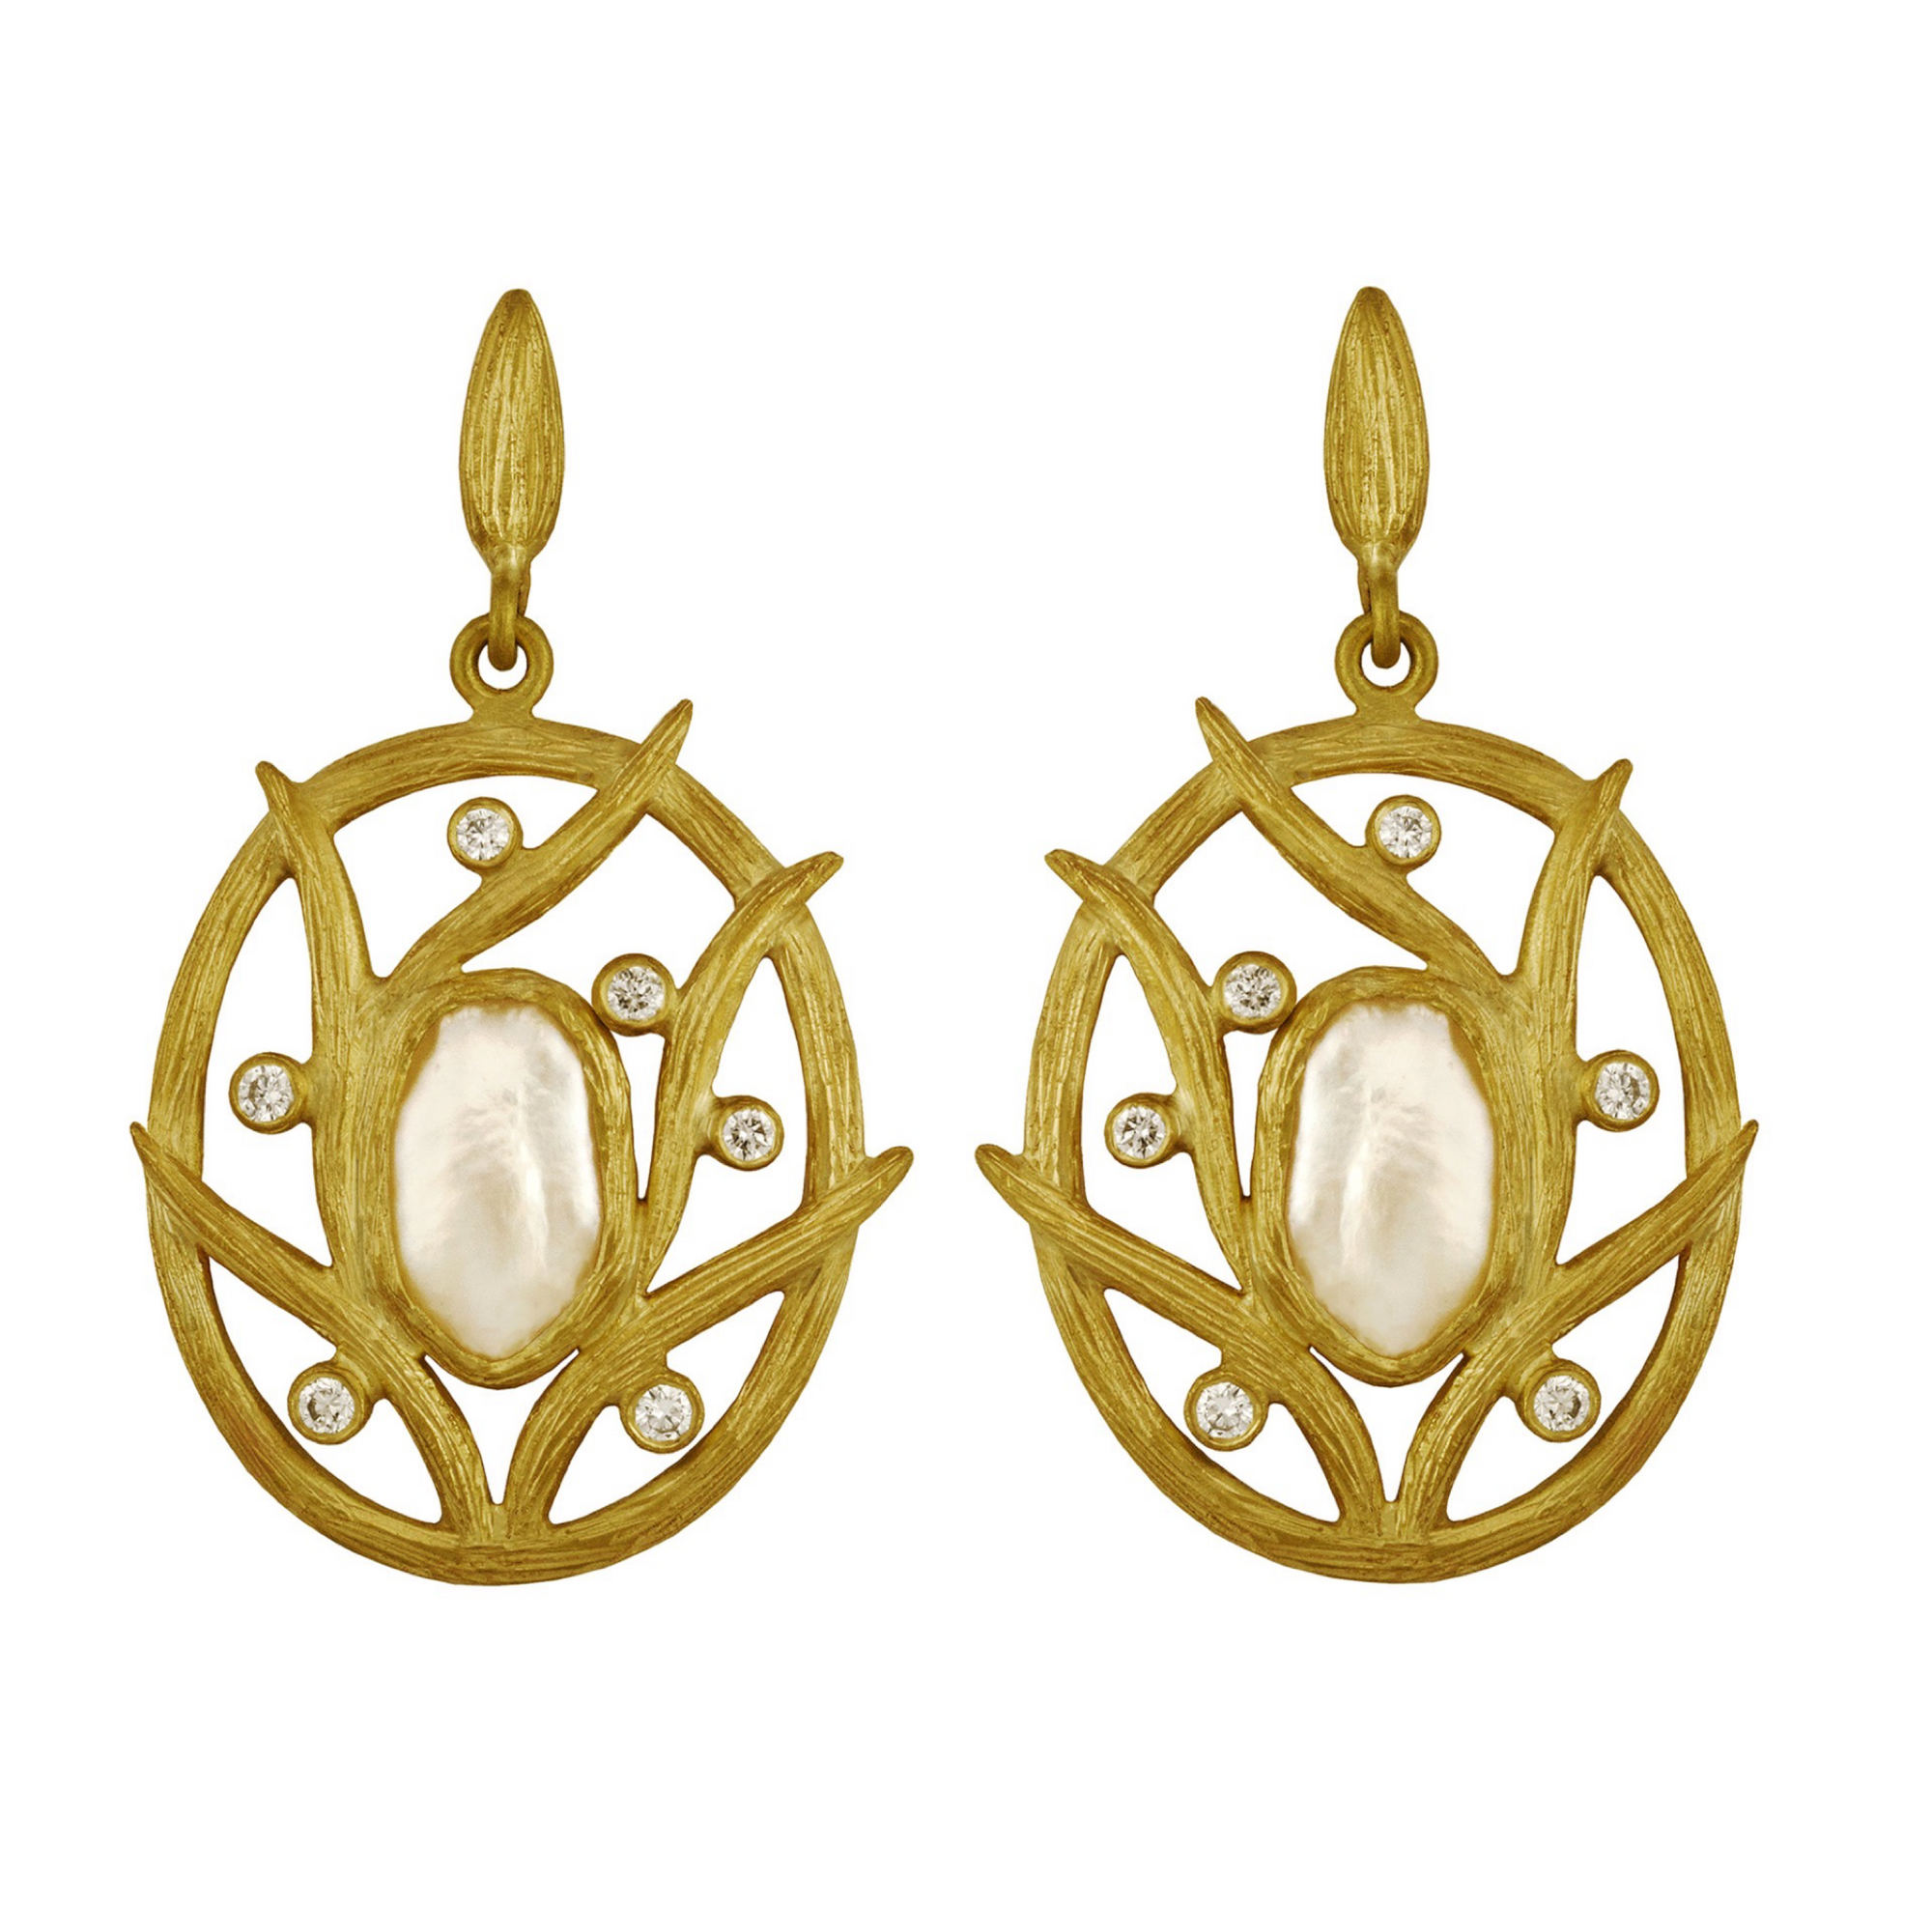 Pearl and Diamond Vine Pear Earrings by Laurie Kaiser available at Talisman Collection Fine Jewelers in El Dorado Hills, CA and online. Sophisticated and elegant, the Pearl and Diamond Vine Pear Earrings, feature natural pearls and white brilliant diamonds set in 18k yellow gold. With a total diamond weight of 0.17 carats, these exquisite earrings are perfect for any occasion. You'll love wearing them again and again.